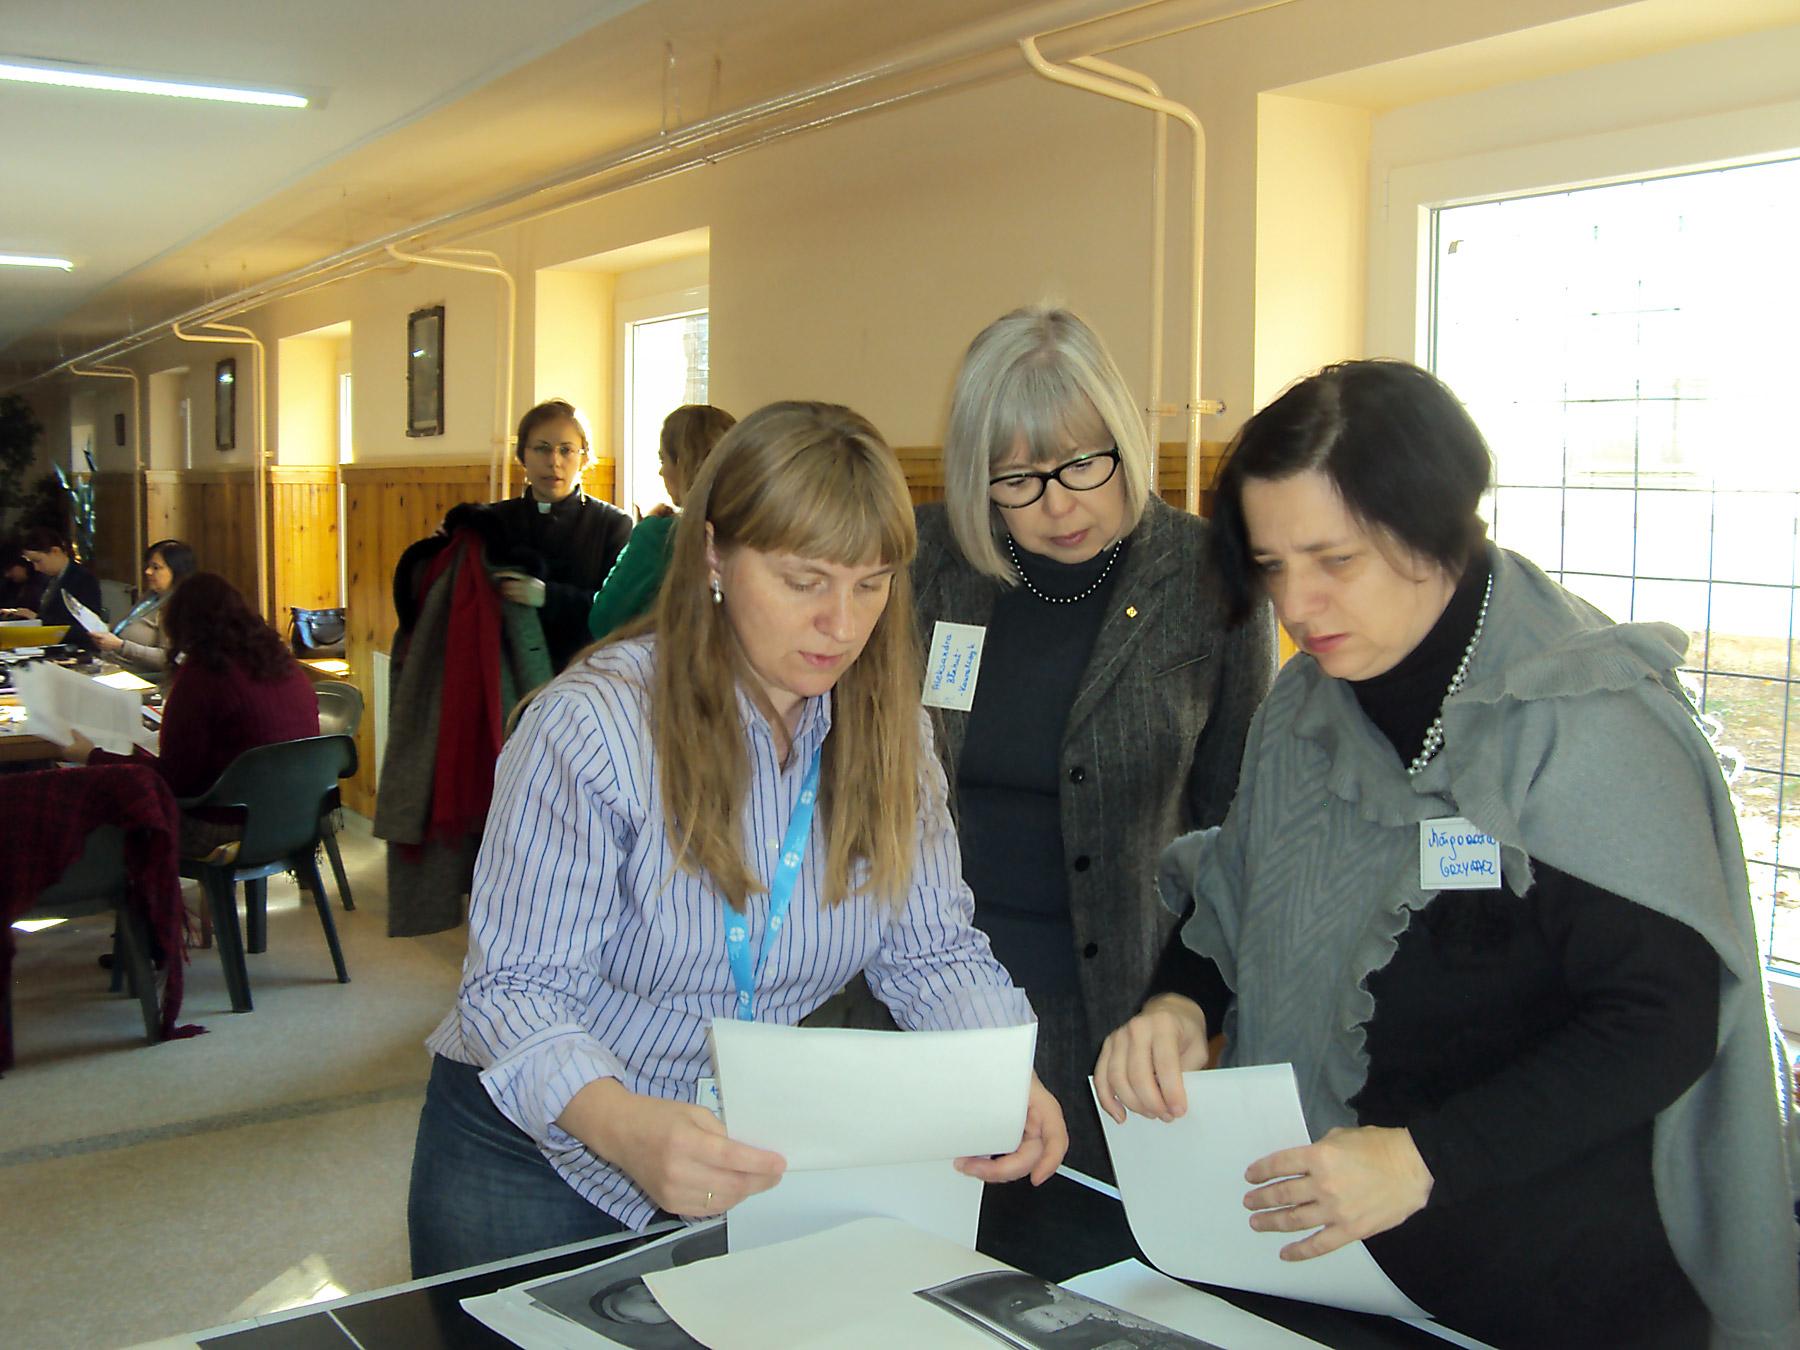 Polish delegates sharing women's stories from their church. Photo: LWF/C. Rendon